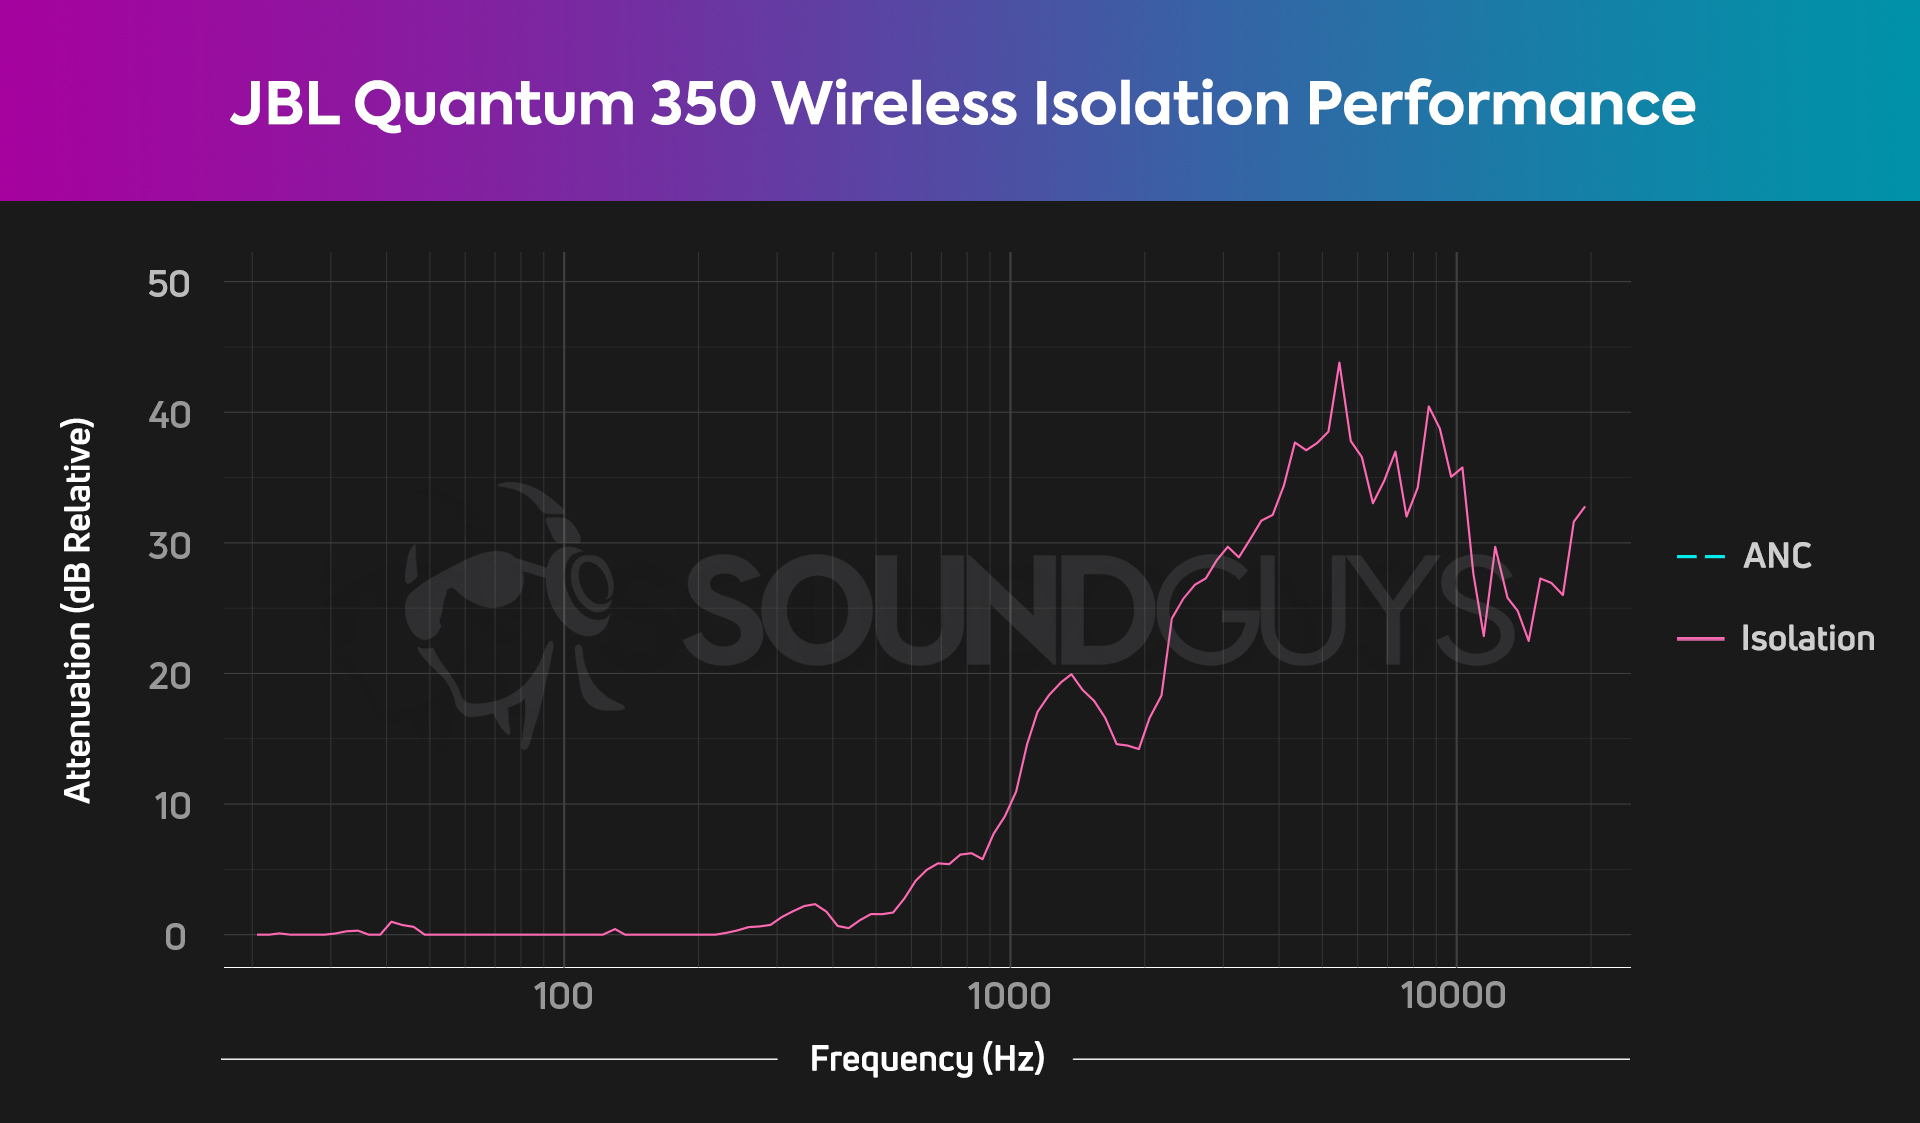 This is the isolation chart for the JBL Quantum 350 Wireless, which shows pretty good isolation for a gaming headset.